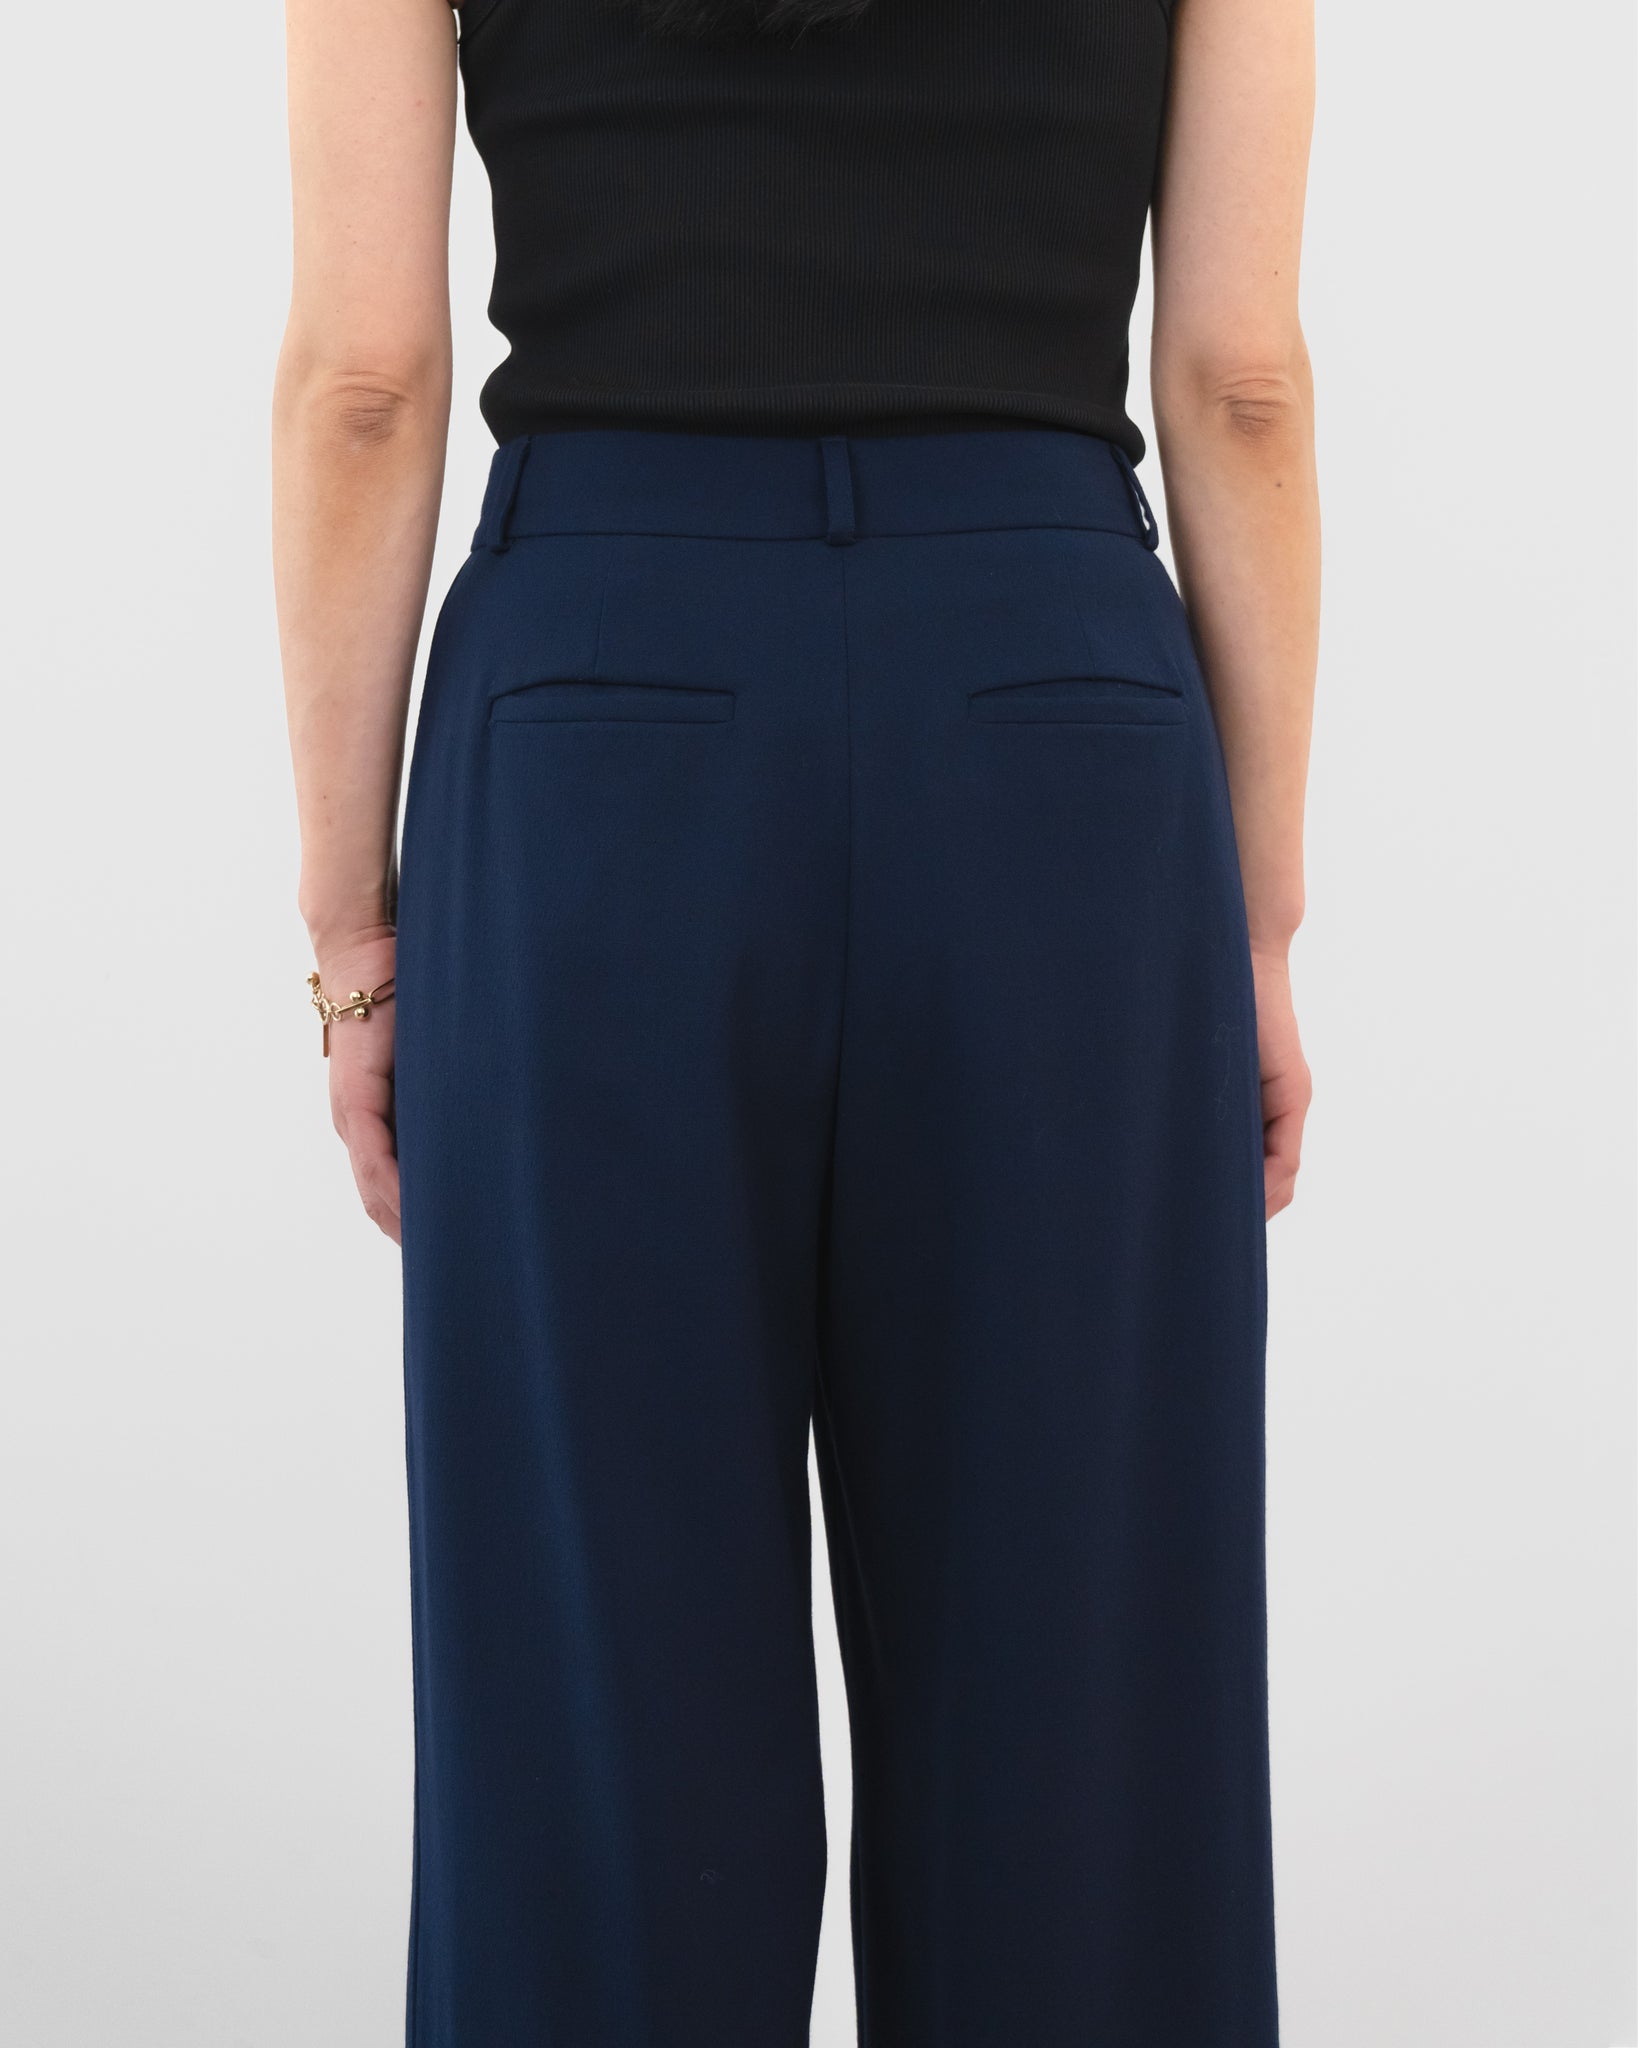 alexis wool wide pleated tower pant